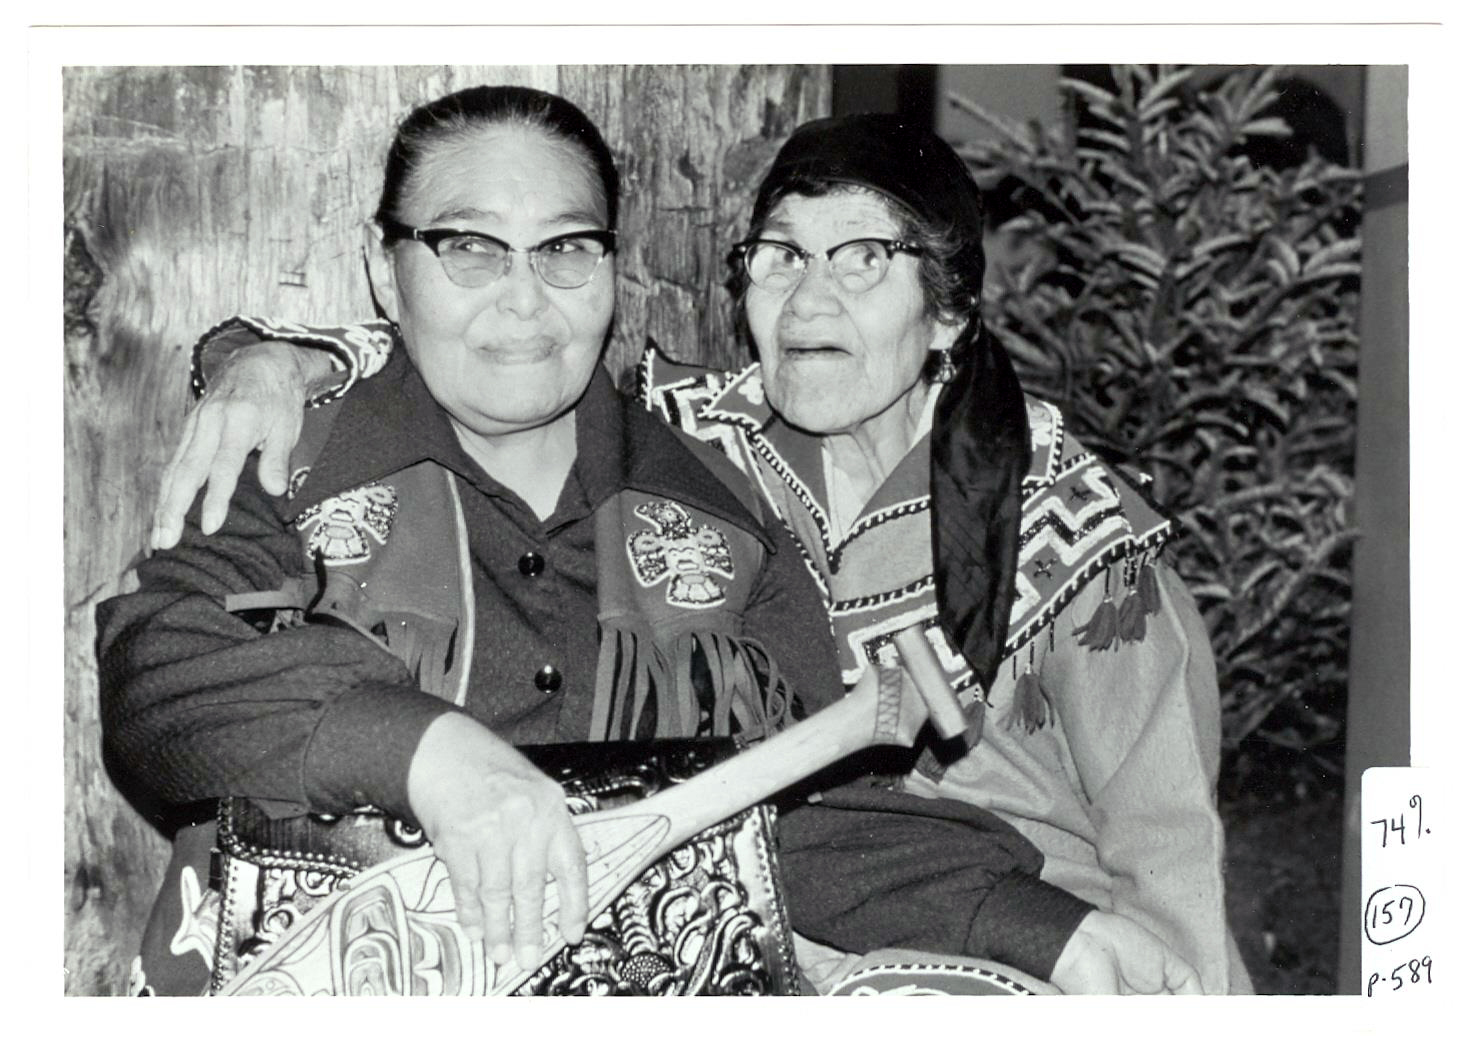 Emma Marks, Seigheighei (Tlingit) and Jennie Thlunaut, Shaaxʼsáani Kéekʼ (Tlingit), April 1974. Emma Marks wears a vest beaded with the raven and sockeye salmon crests of her clan, the Lukaxh.ádi clan of the Raven moiety (the tail of the sockeye salmon can be seen at the bottom left of the image on her vest pocket). Jennie Thlunaut, a master naaxein weaver discussed in this essay, wears a beaded tunic with V-yoke in the Athabascan style that was popular among northern Tlingit communities, like Klukwan where Thlunaut grew up (Dauenhauer Photograph Collection. PO 004, Box 7, Item 6. William L. Paul Sr. Archives, Sealaska Heritage Institute, Juneau, AK)